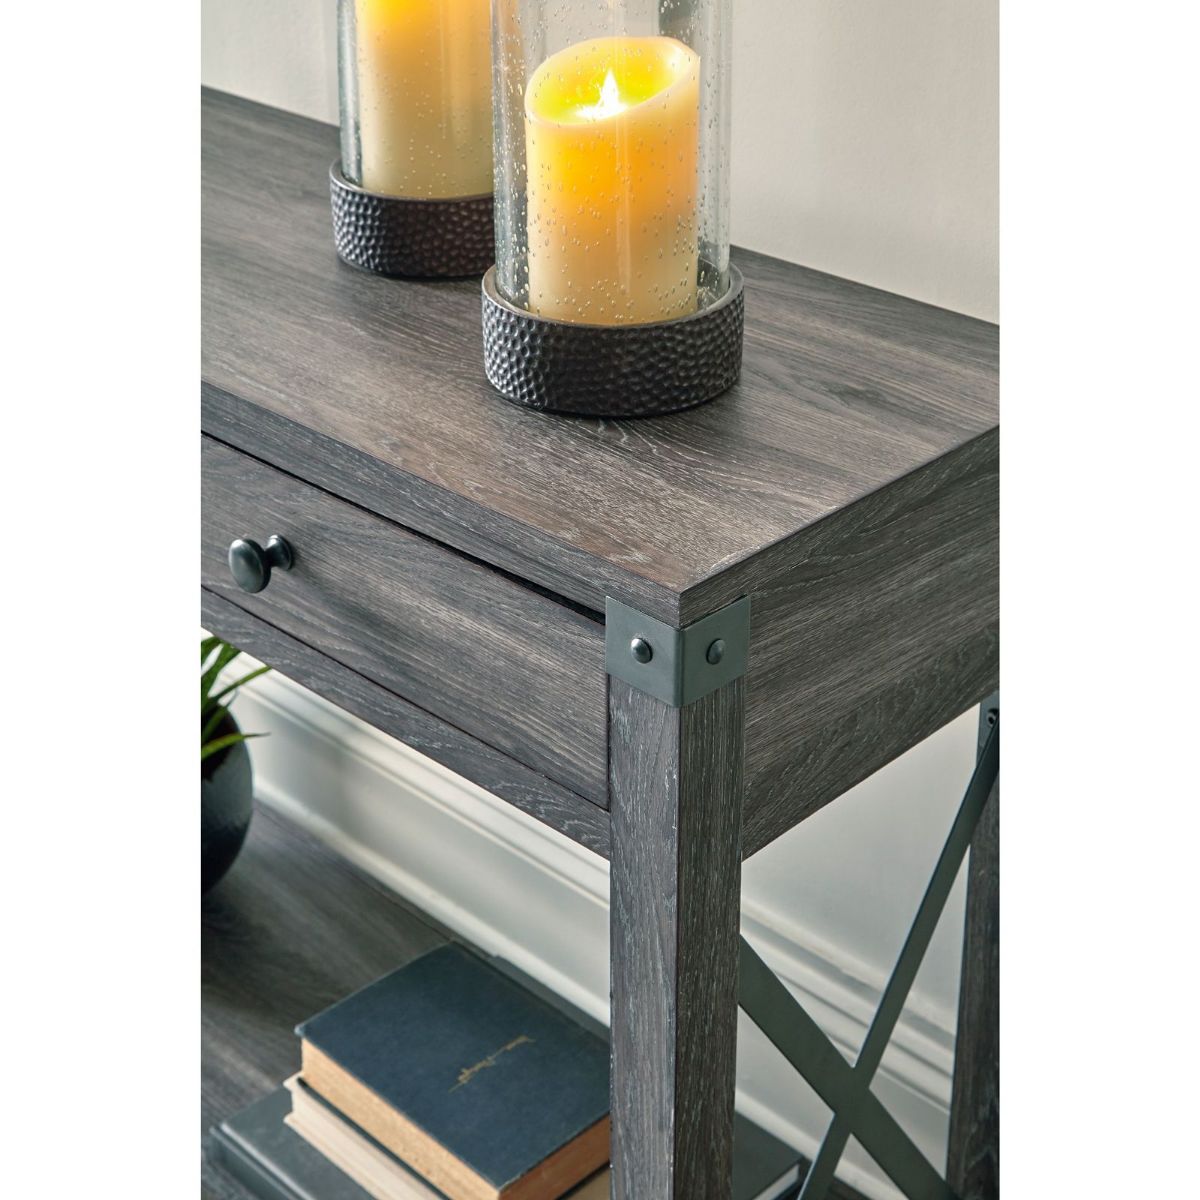 Picture of Freedan Console Table